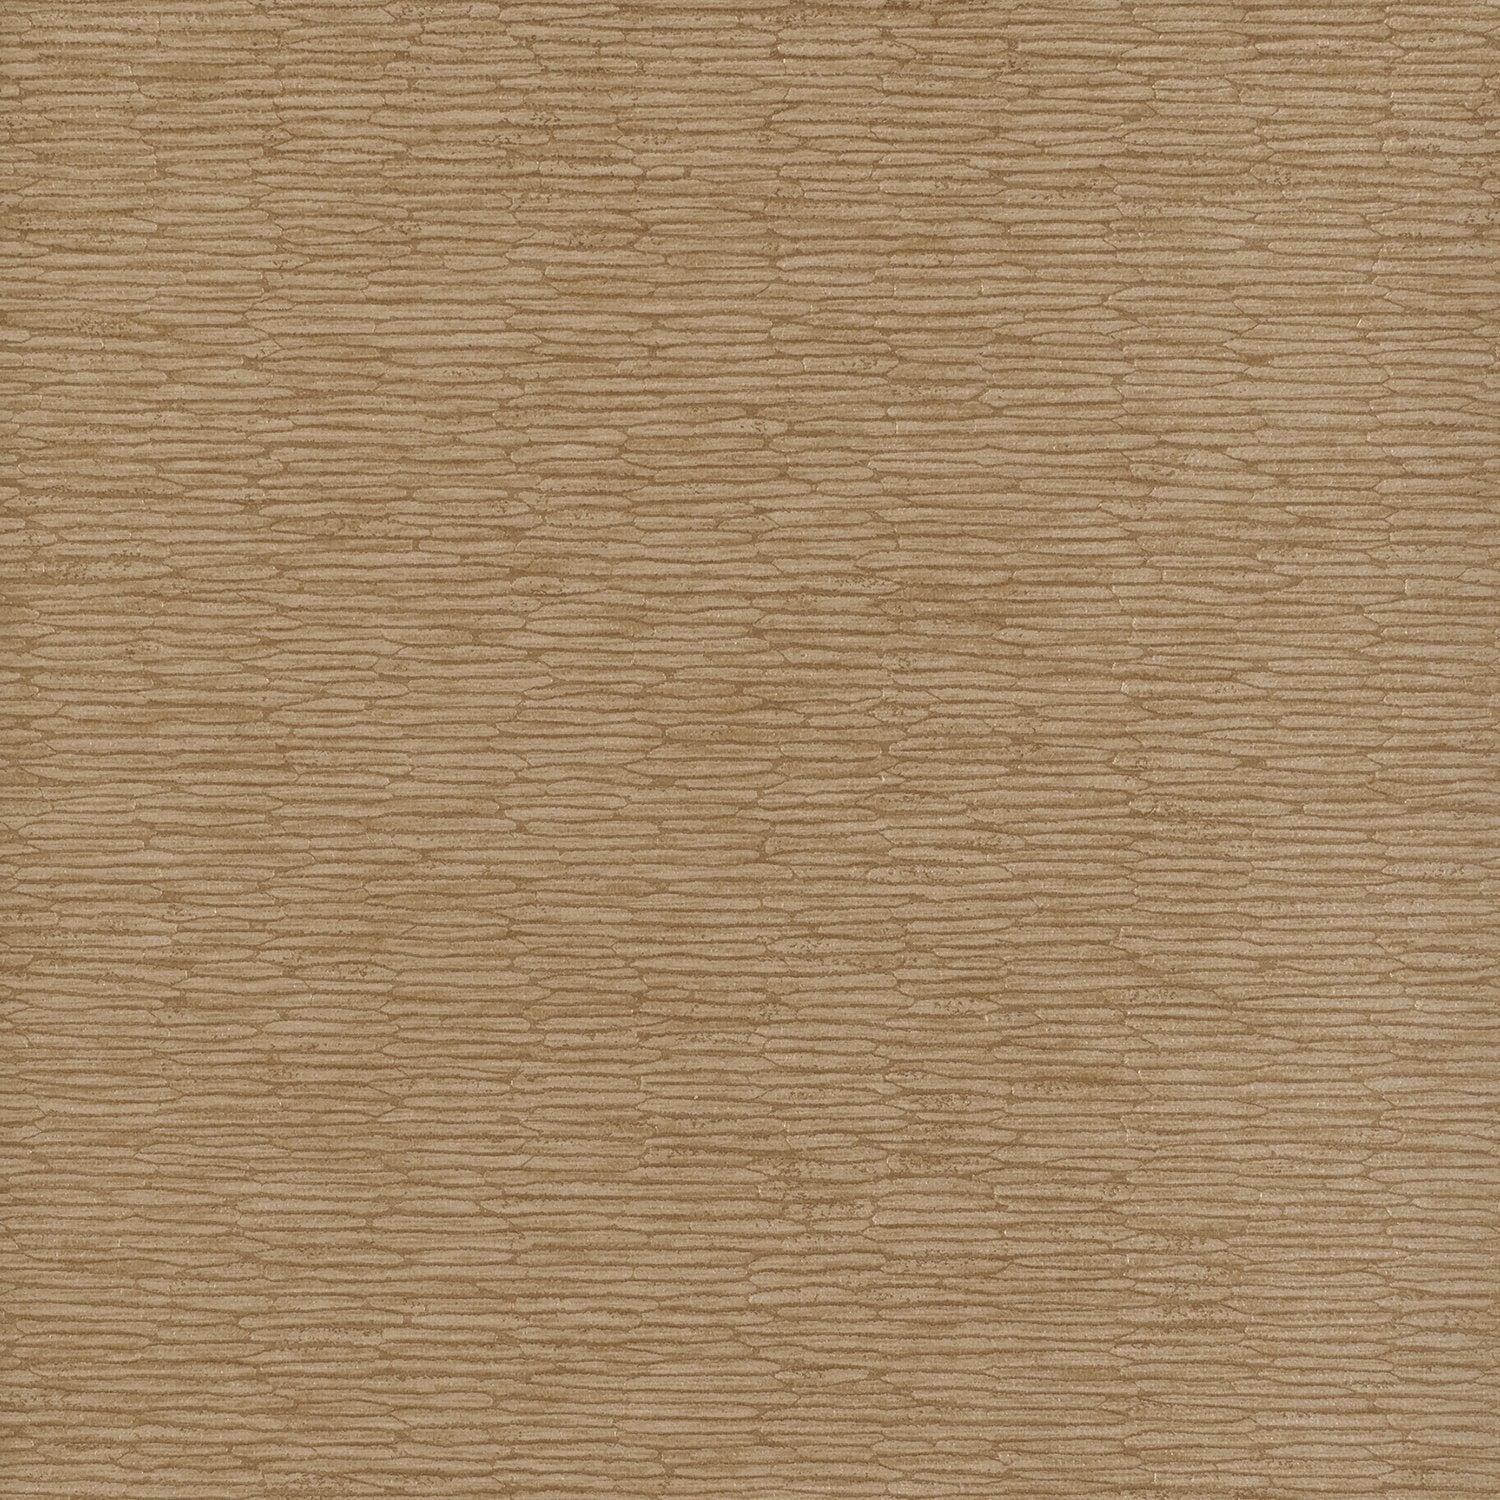 Chipper - Y46860 - Wallcovering - Vycon - Kube Contract